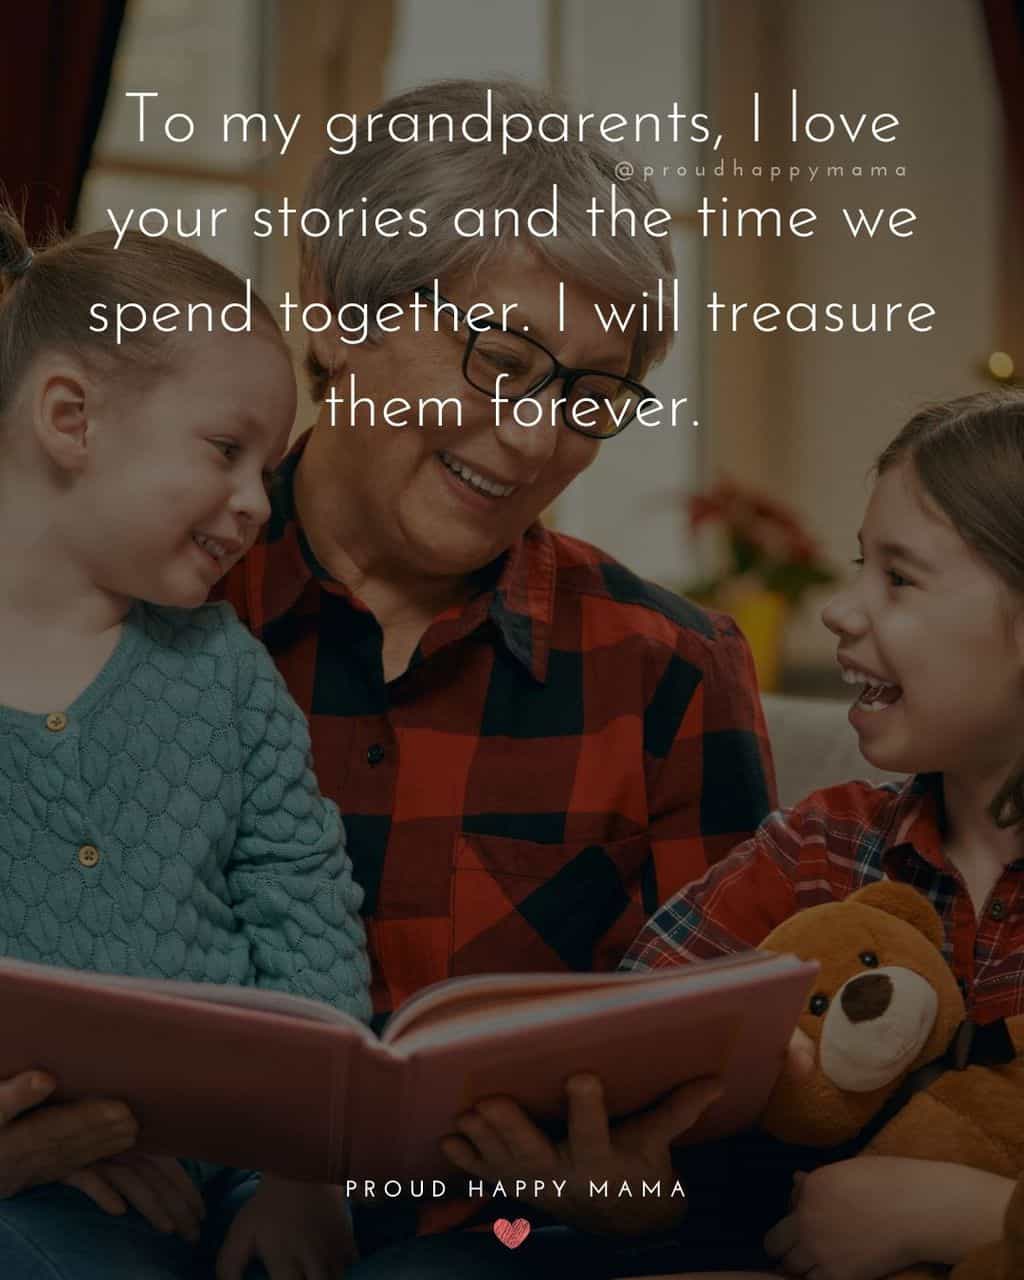 Grandparent Quotes – To my grandparents, I love your stories and the time we spend together. I will treasure them forever.’